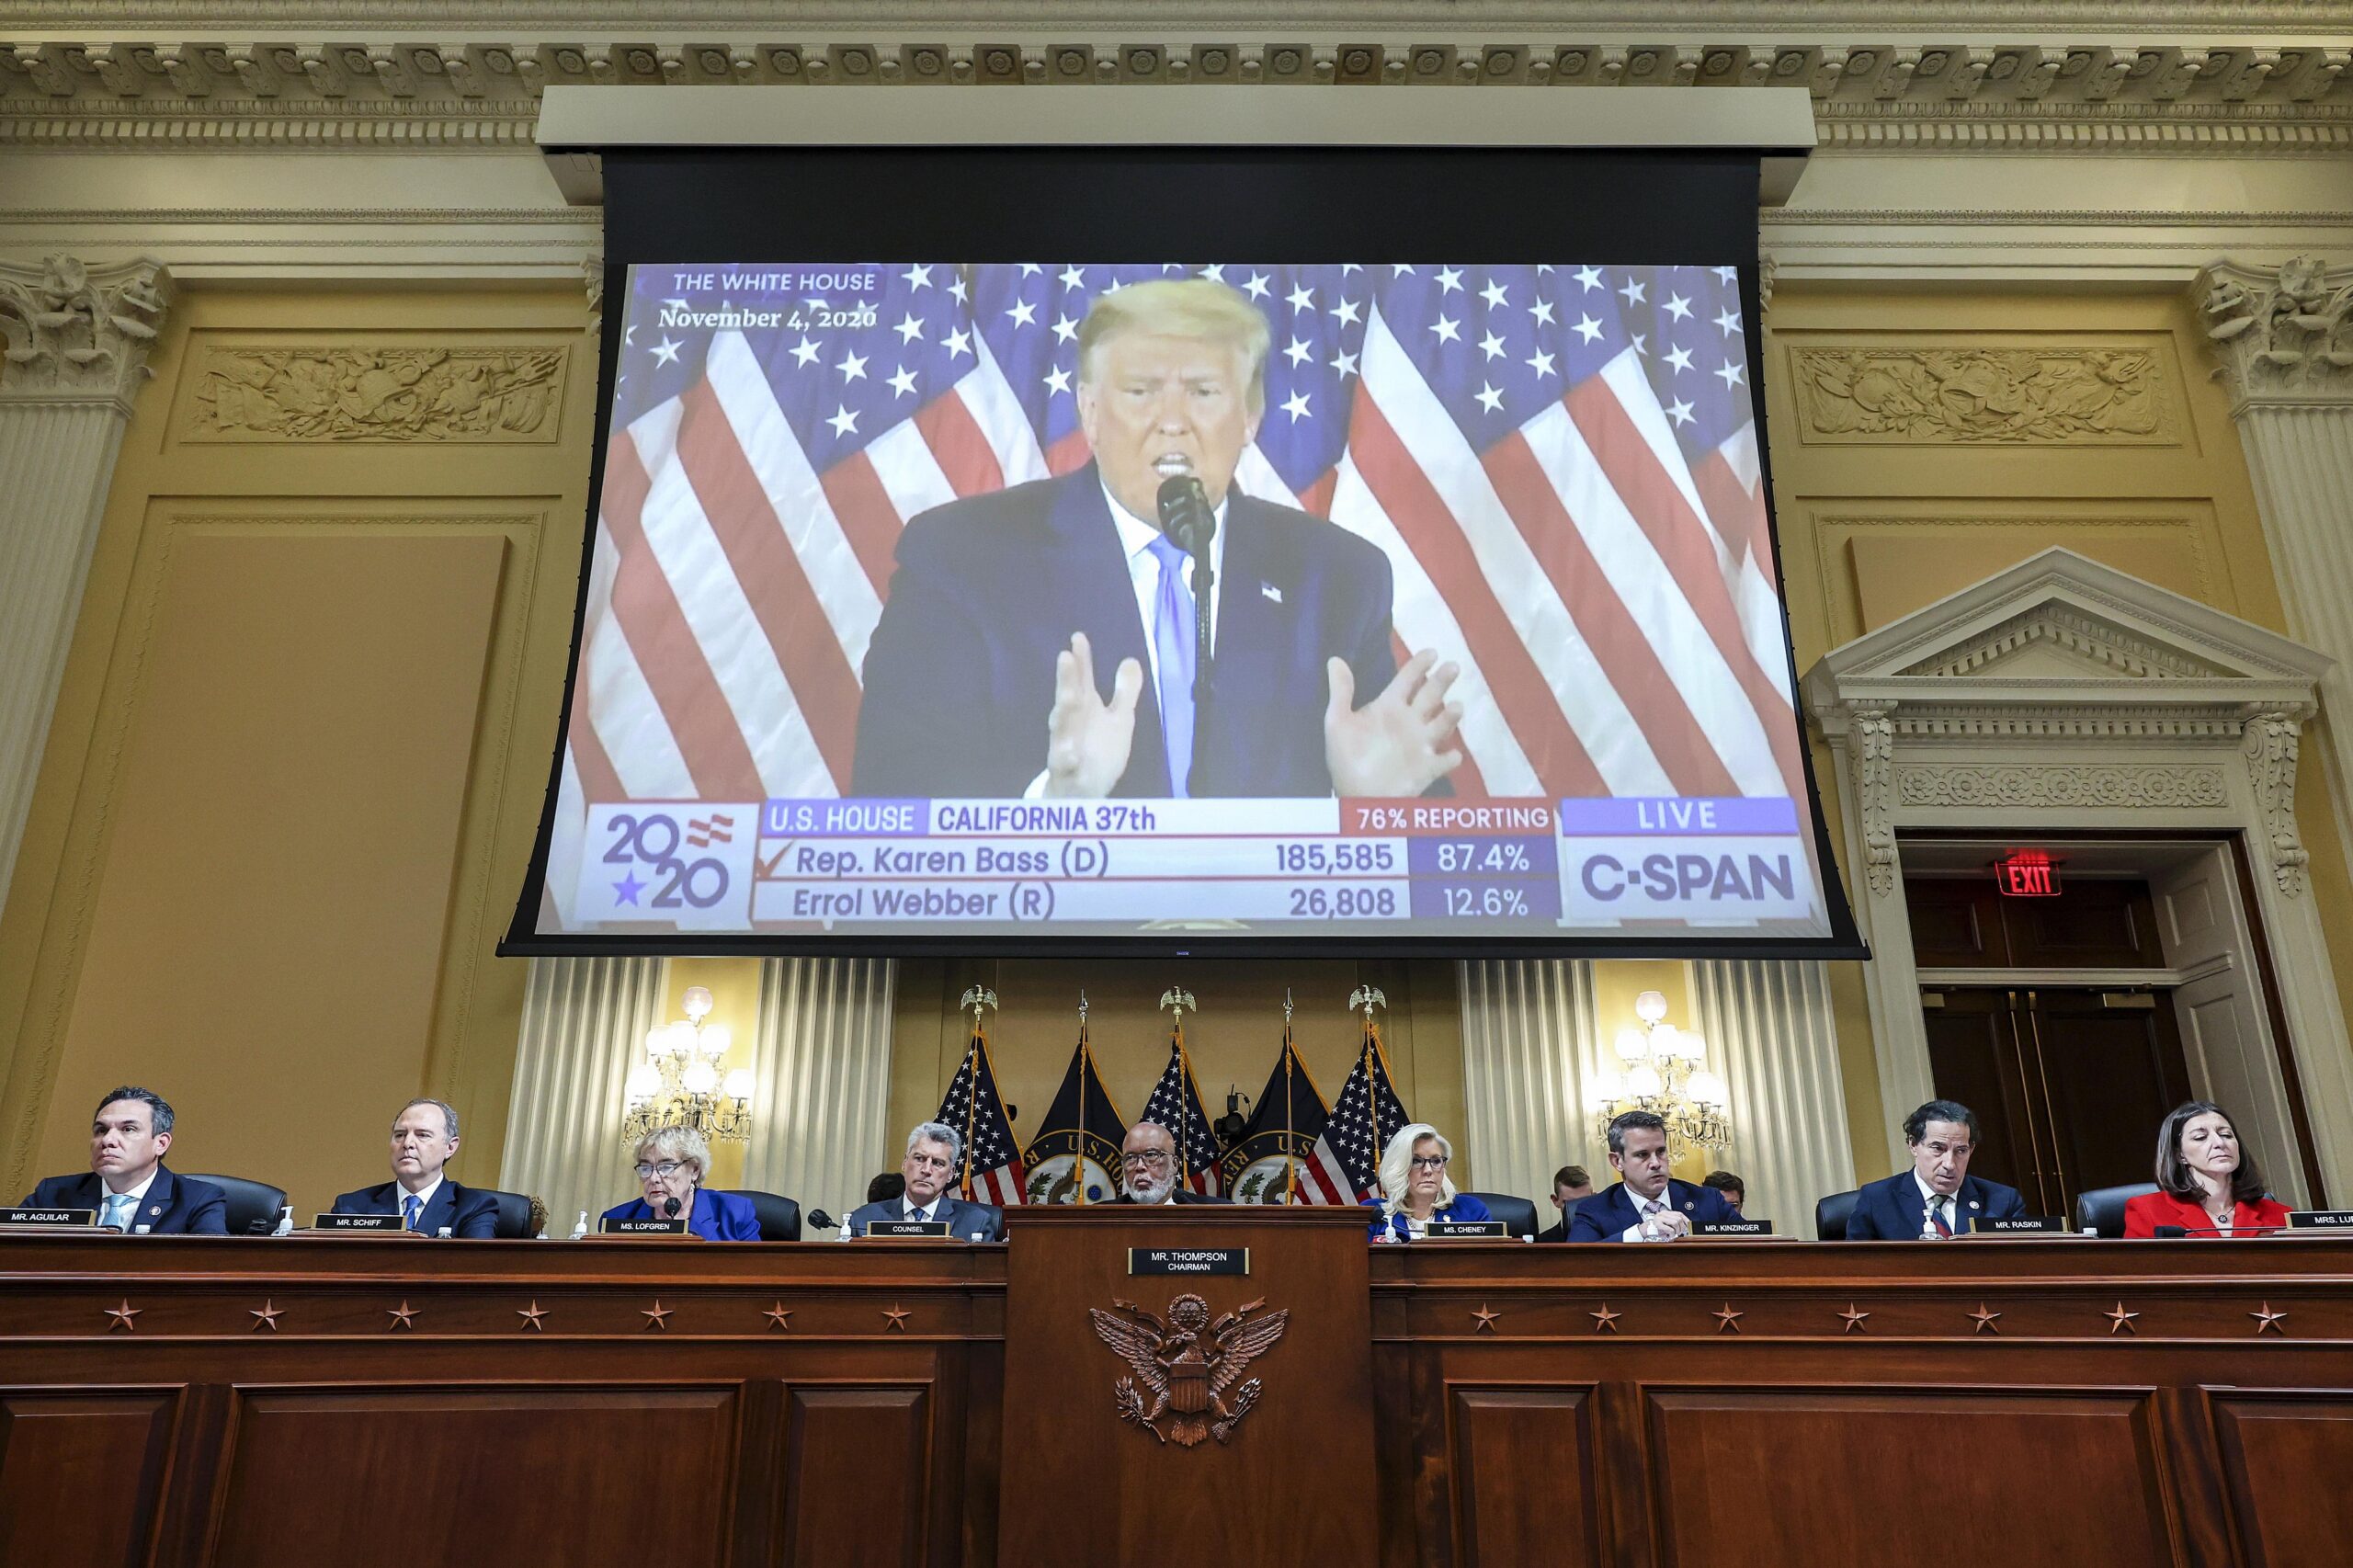 Video of Donald Trump shows on a screen during Jan. 6